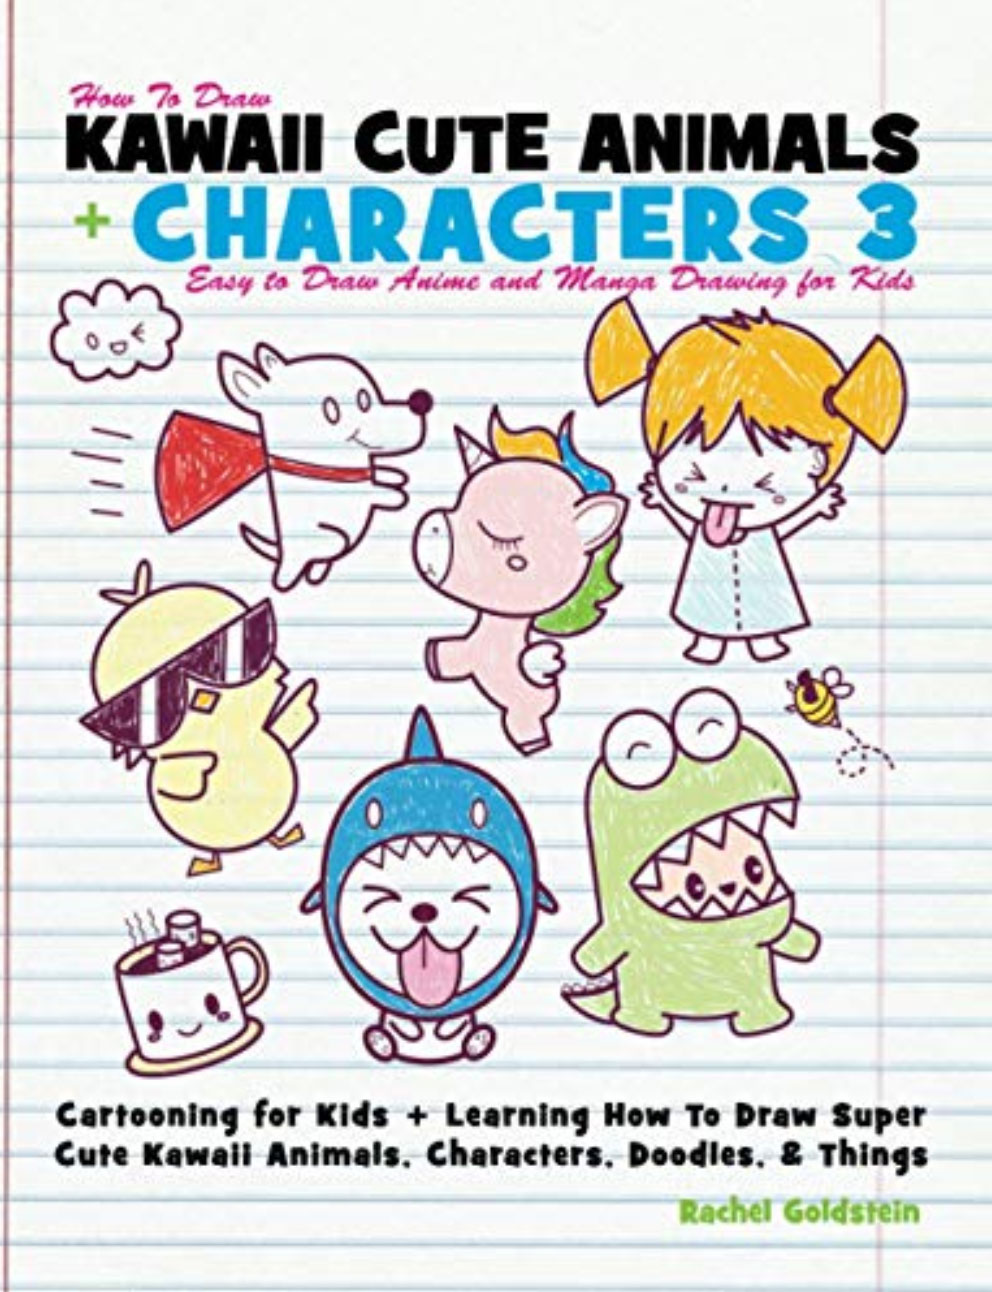 How to draw kawaii cute kawaii characters step by step drawing book for kids chibi